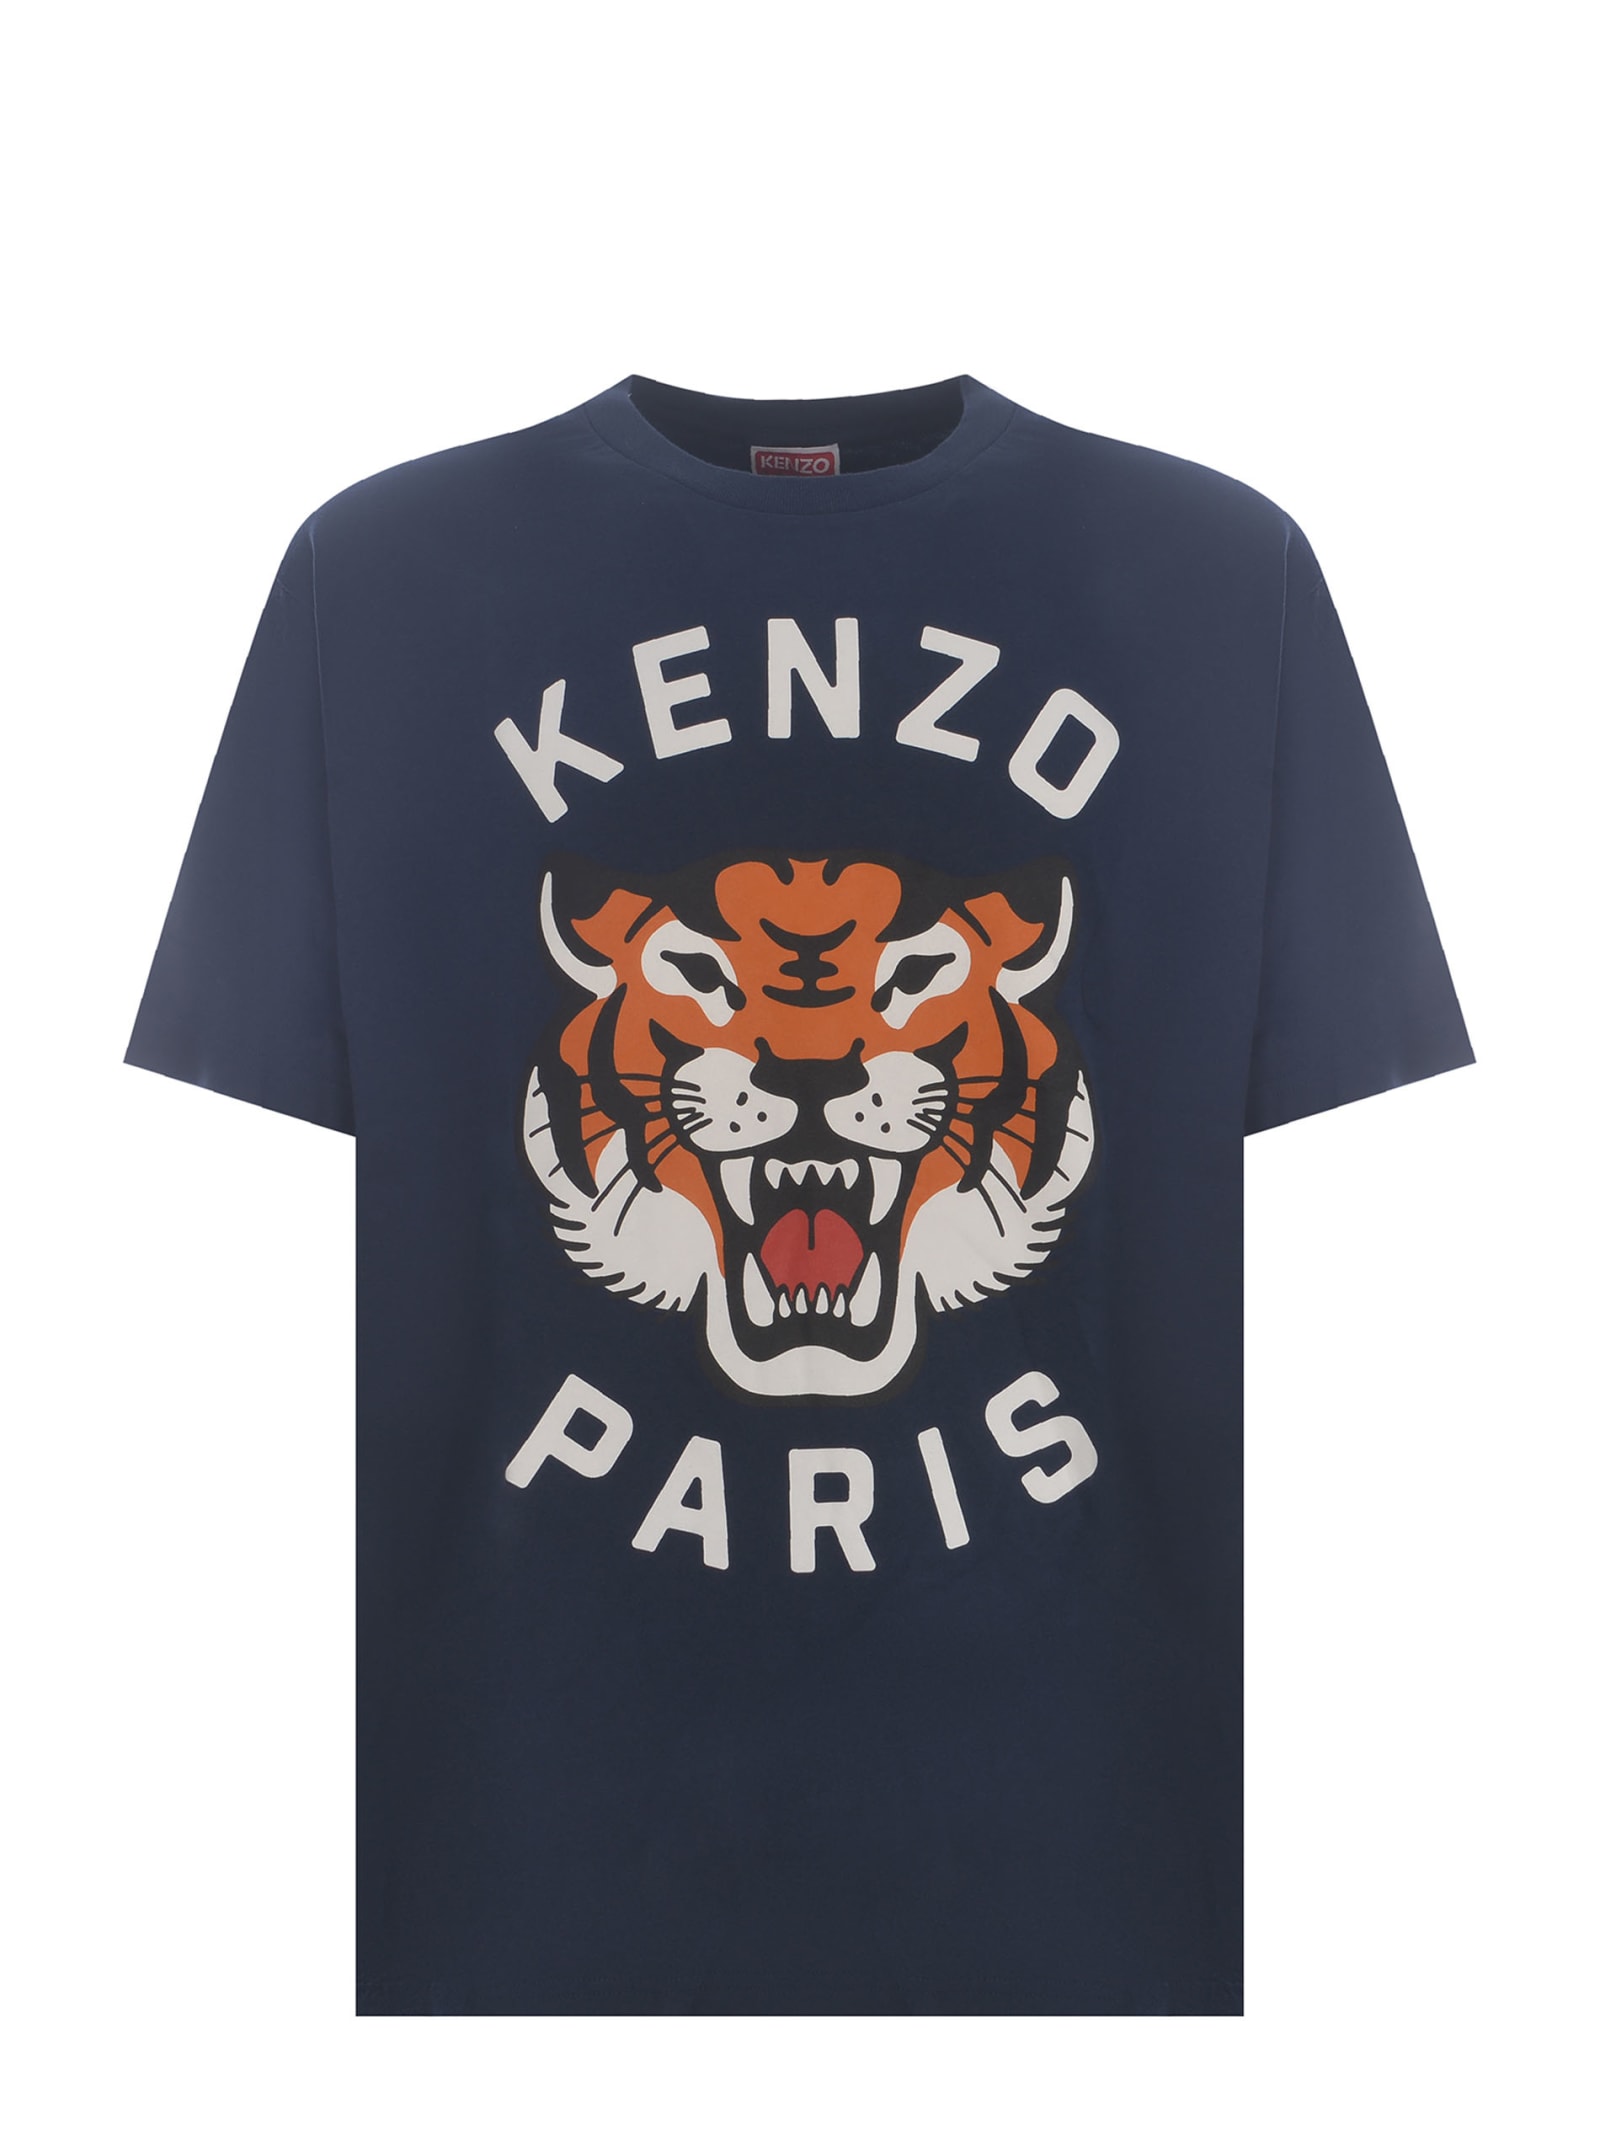 T-shirt Kenzo lucky Tiger Made Of Cotton